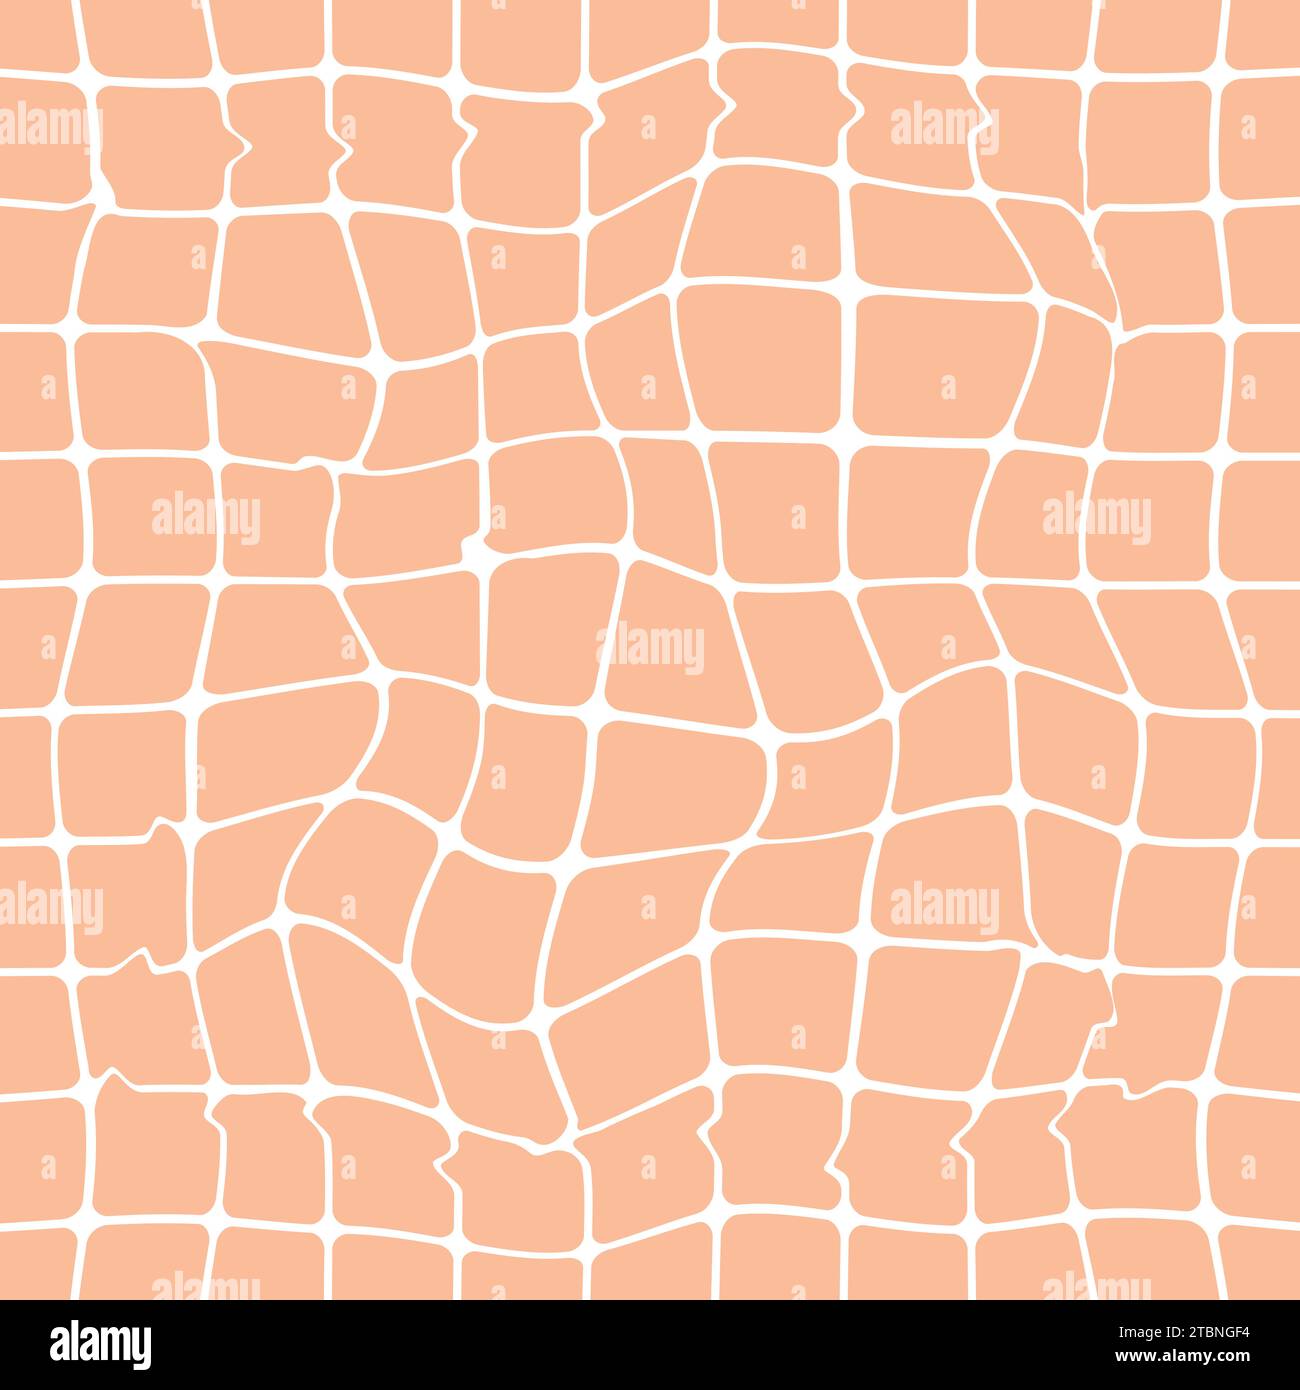 Minimalist bright mosaic seamless pattern. Peach Fuzz wavy distorted grid on a white background.Ideal for printing baby clothes, textiles, fabrics, wr Stock Vector